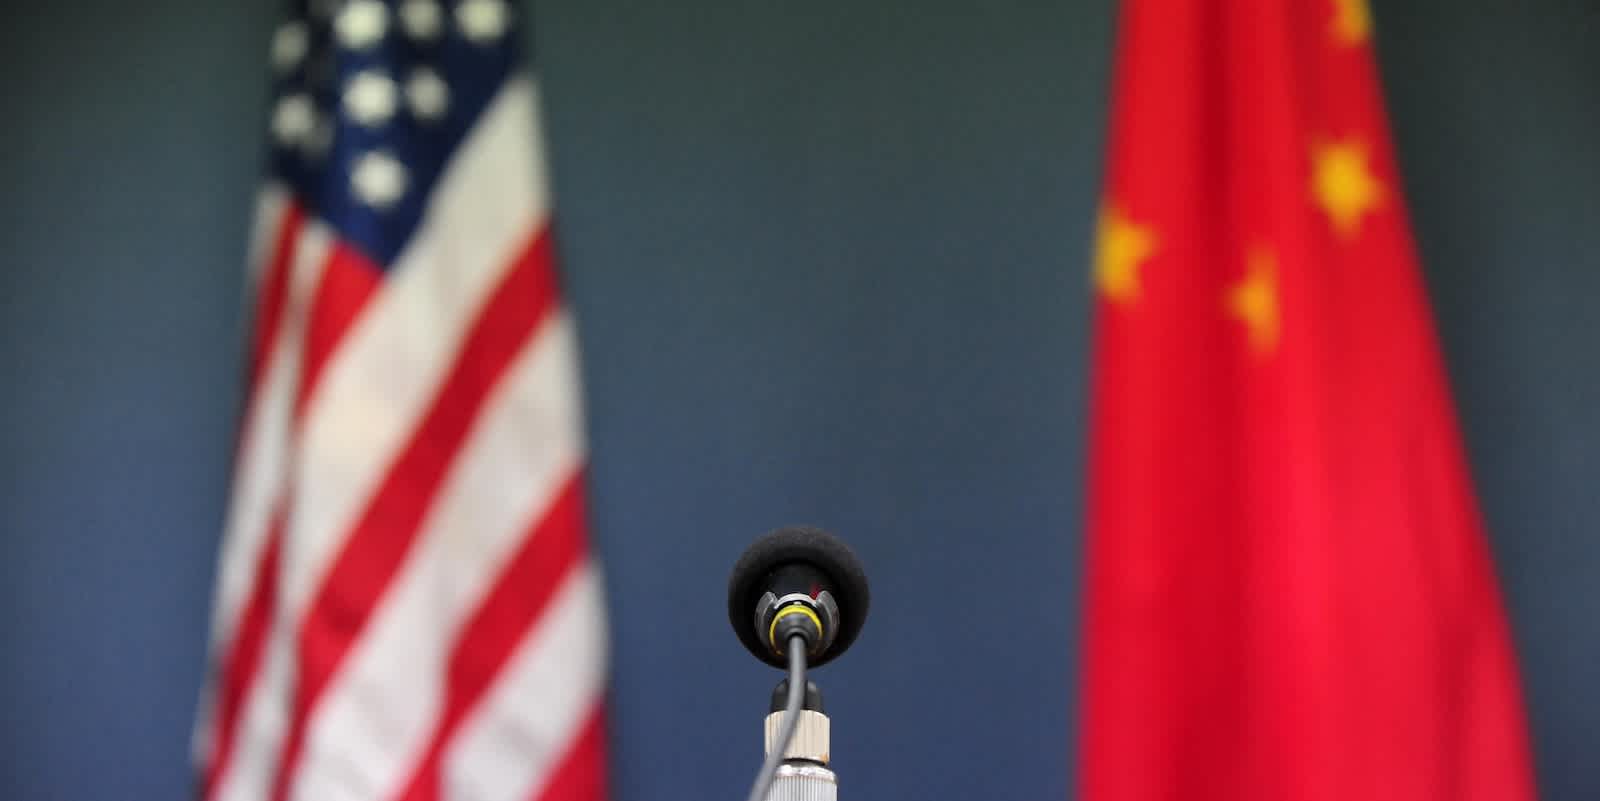 Awaiting an announcement from the U.S. and China